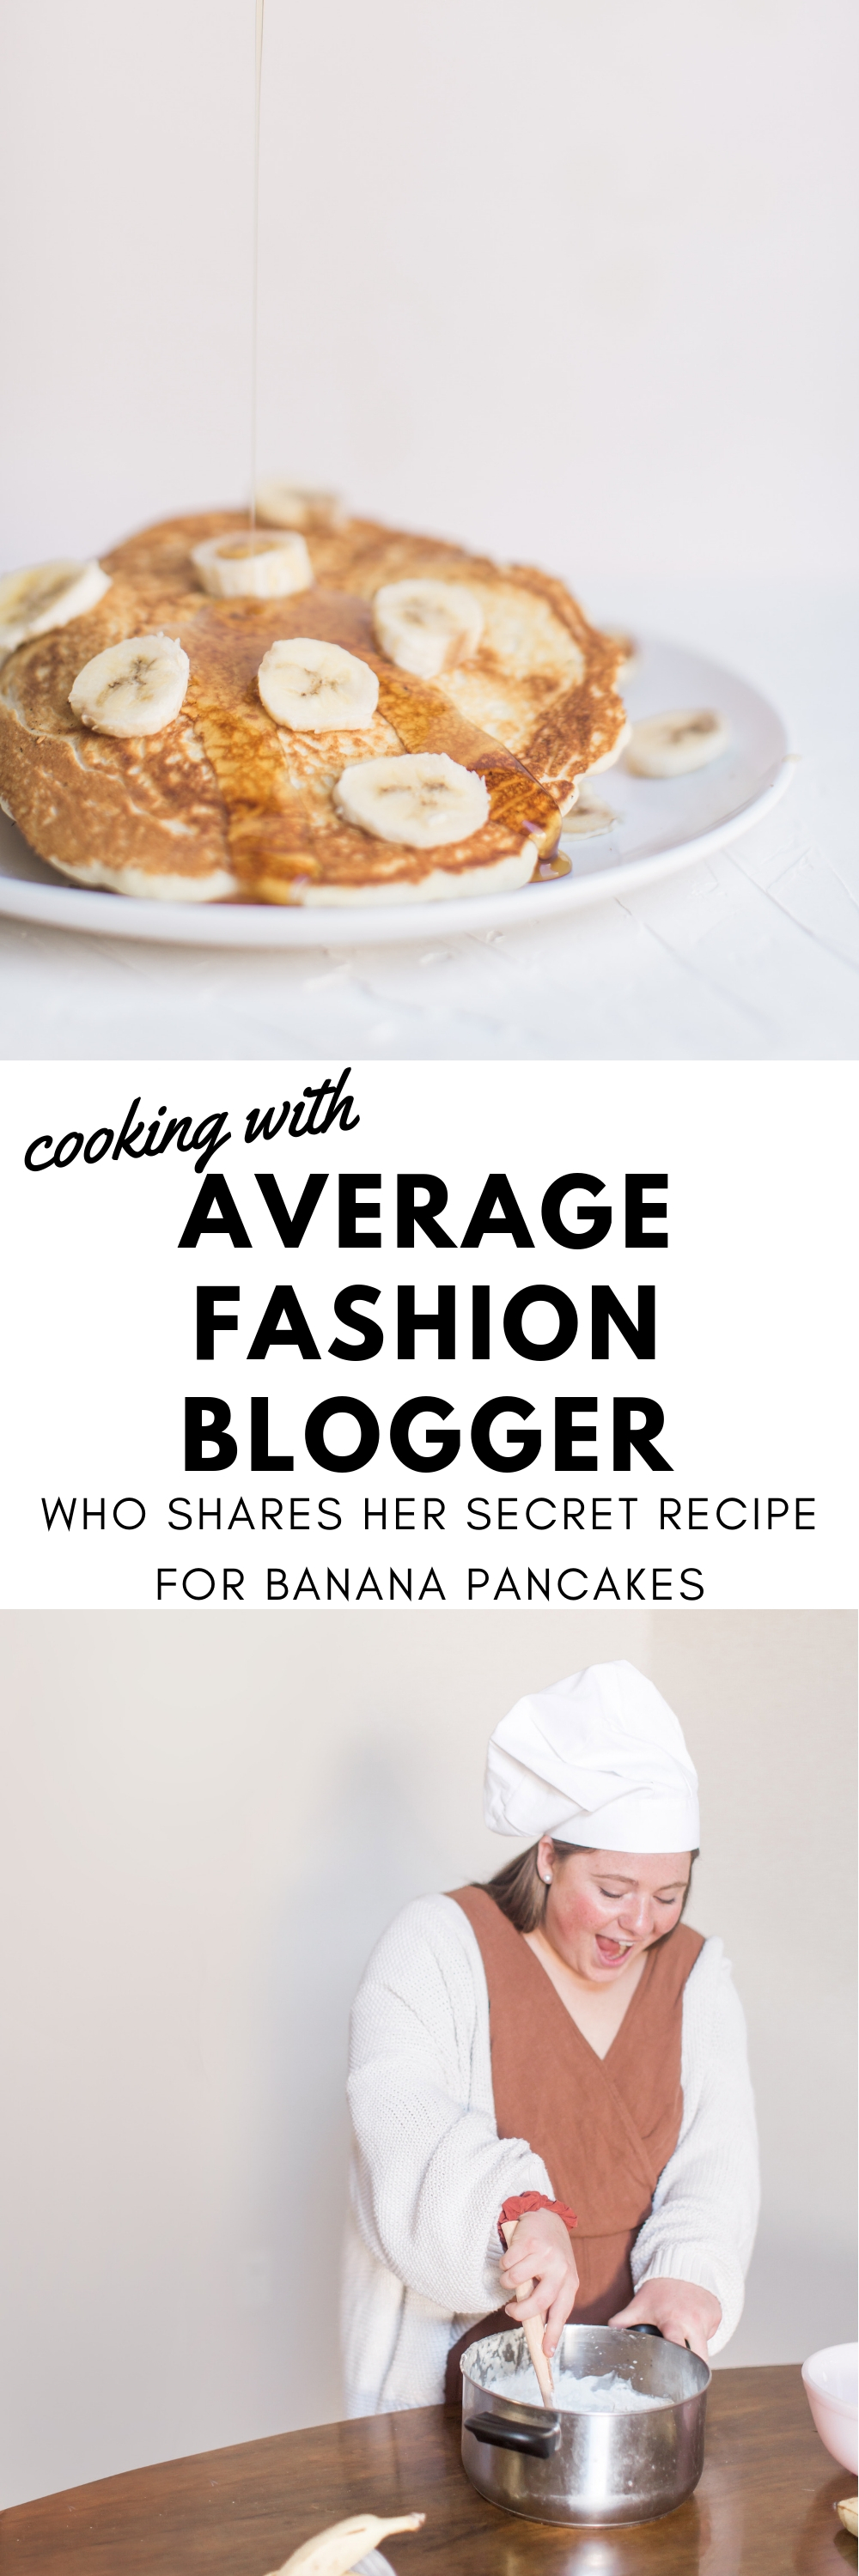 cooking with average fashion blogger